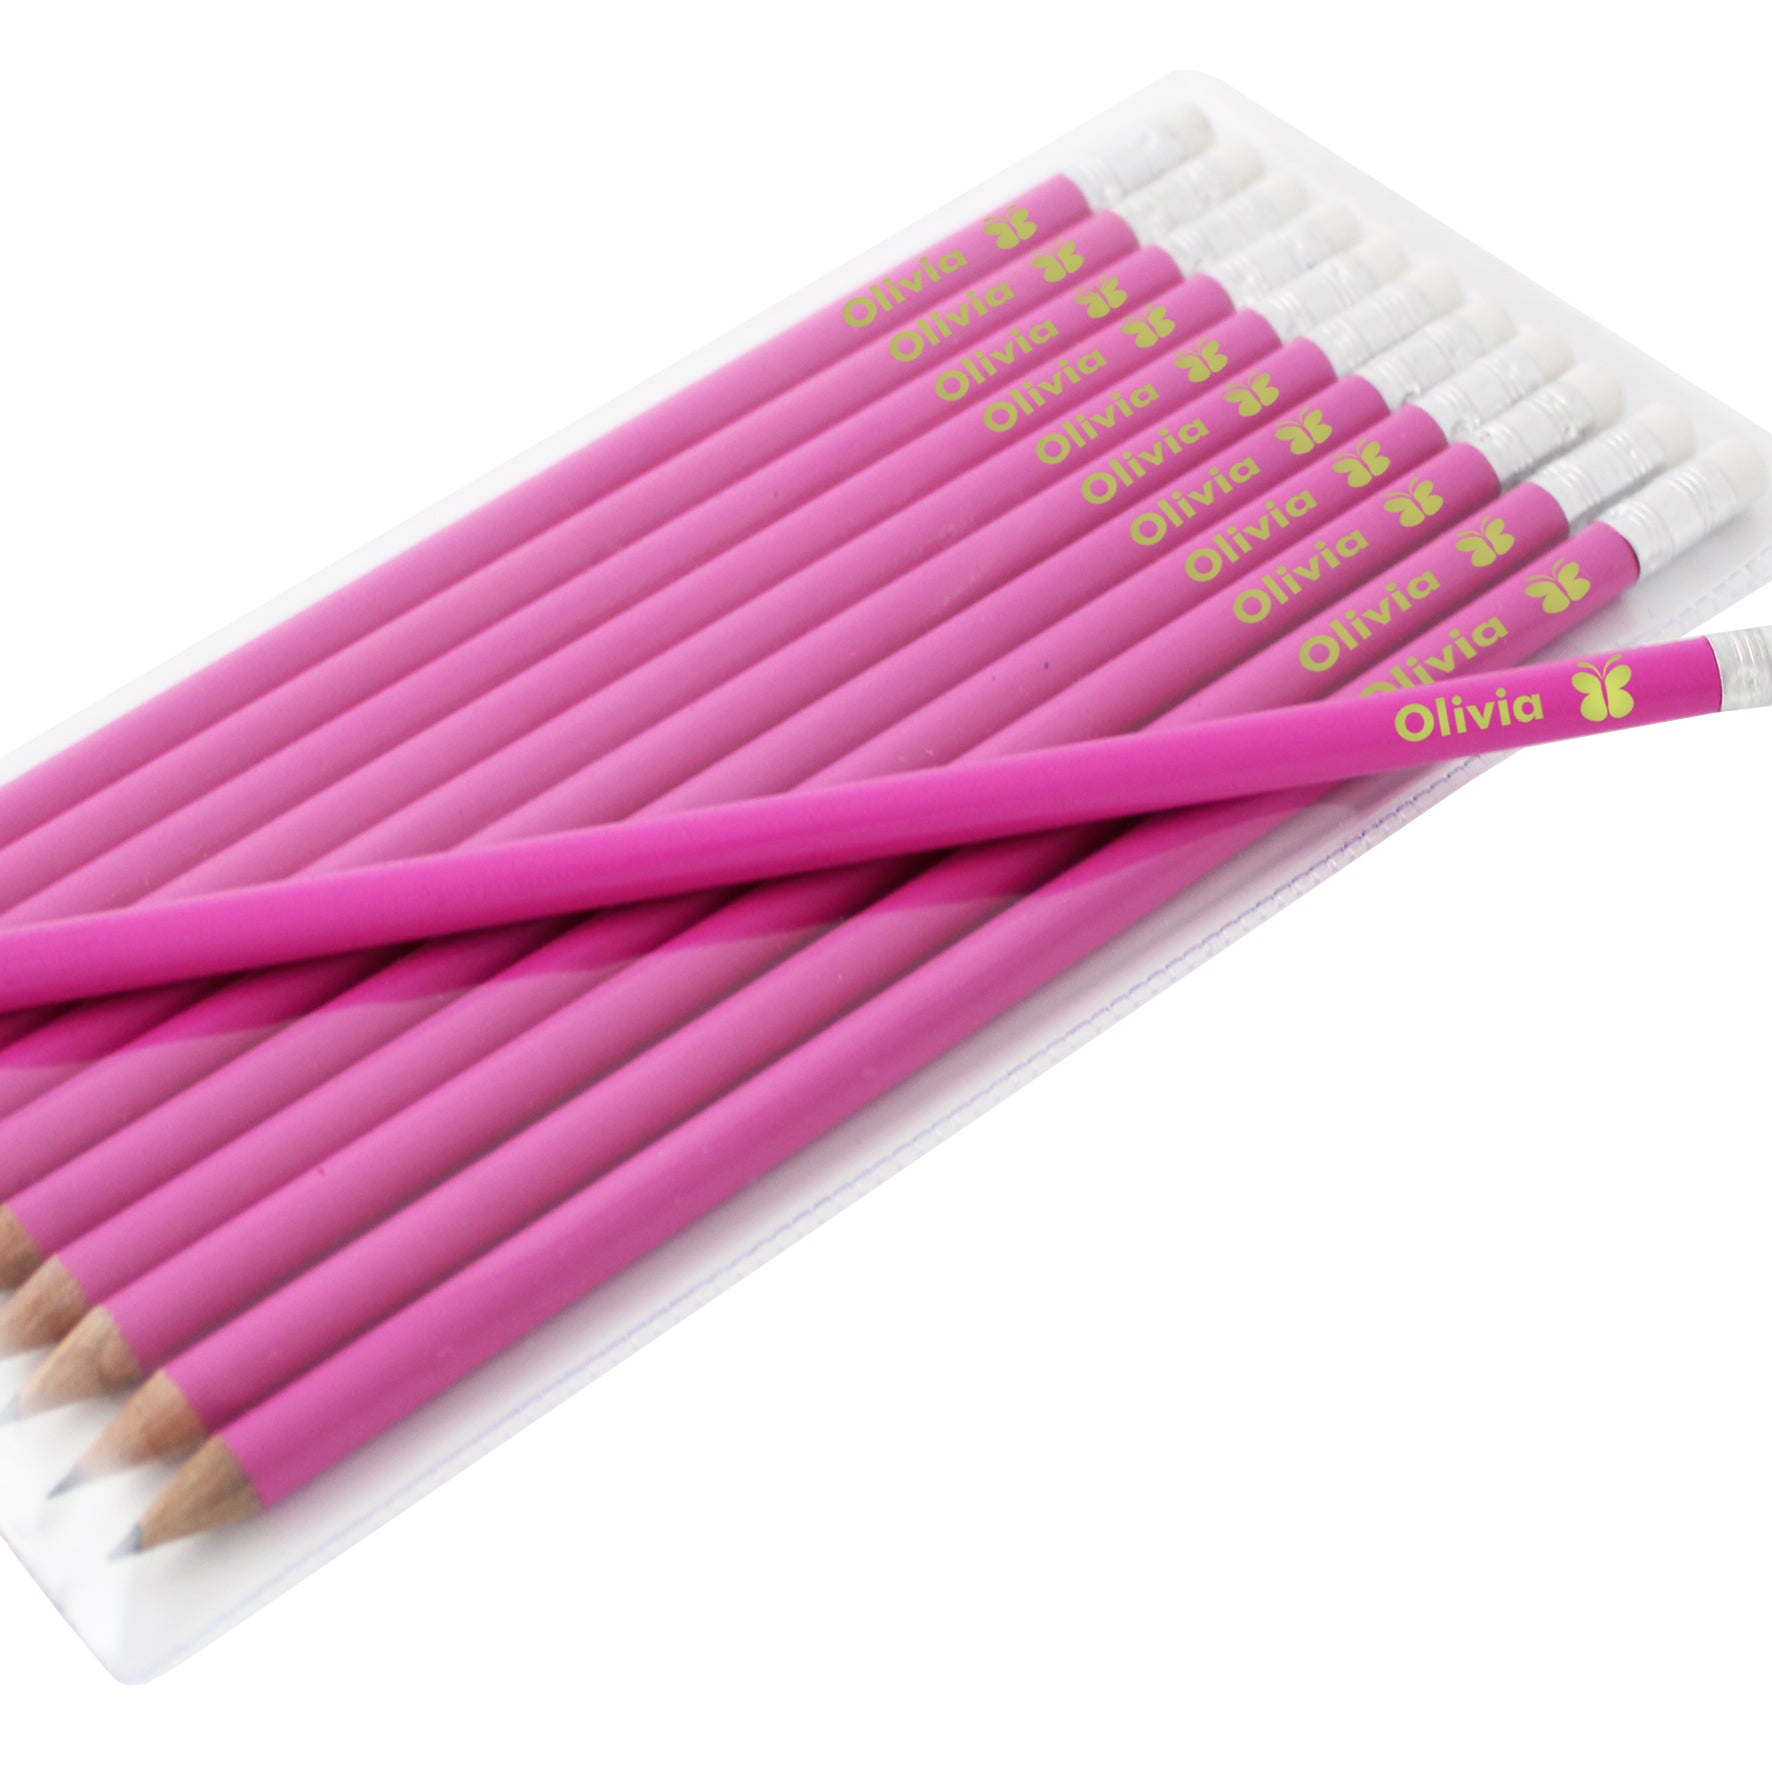 Butterfly motif pink pencils, personalised - Lilybet loves